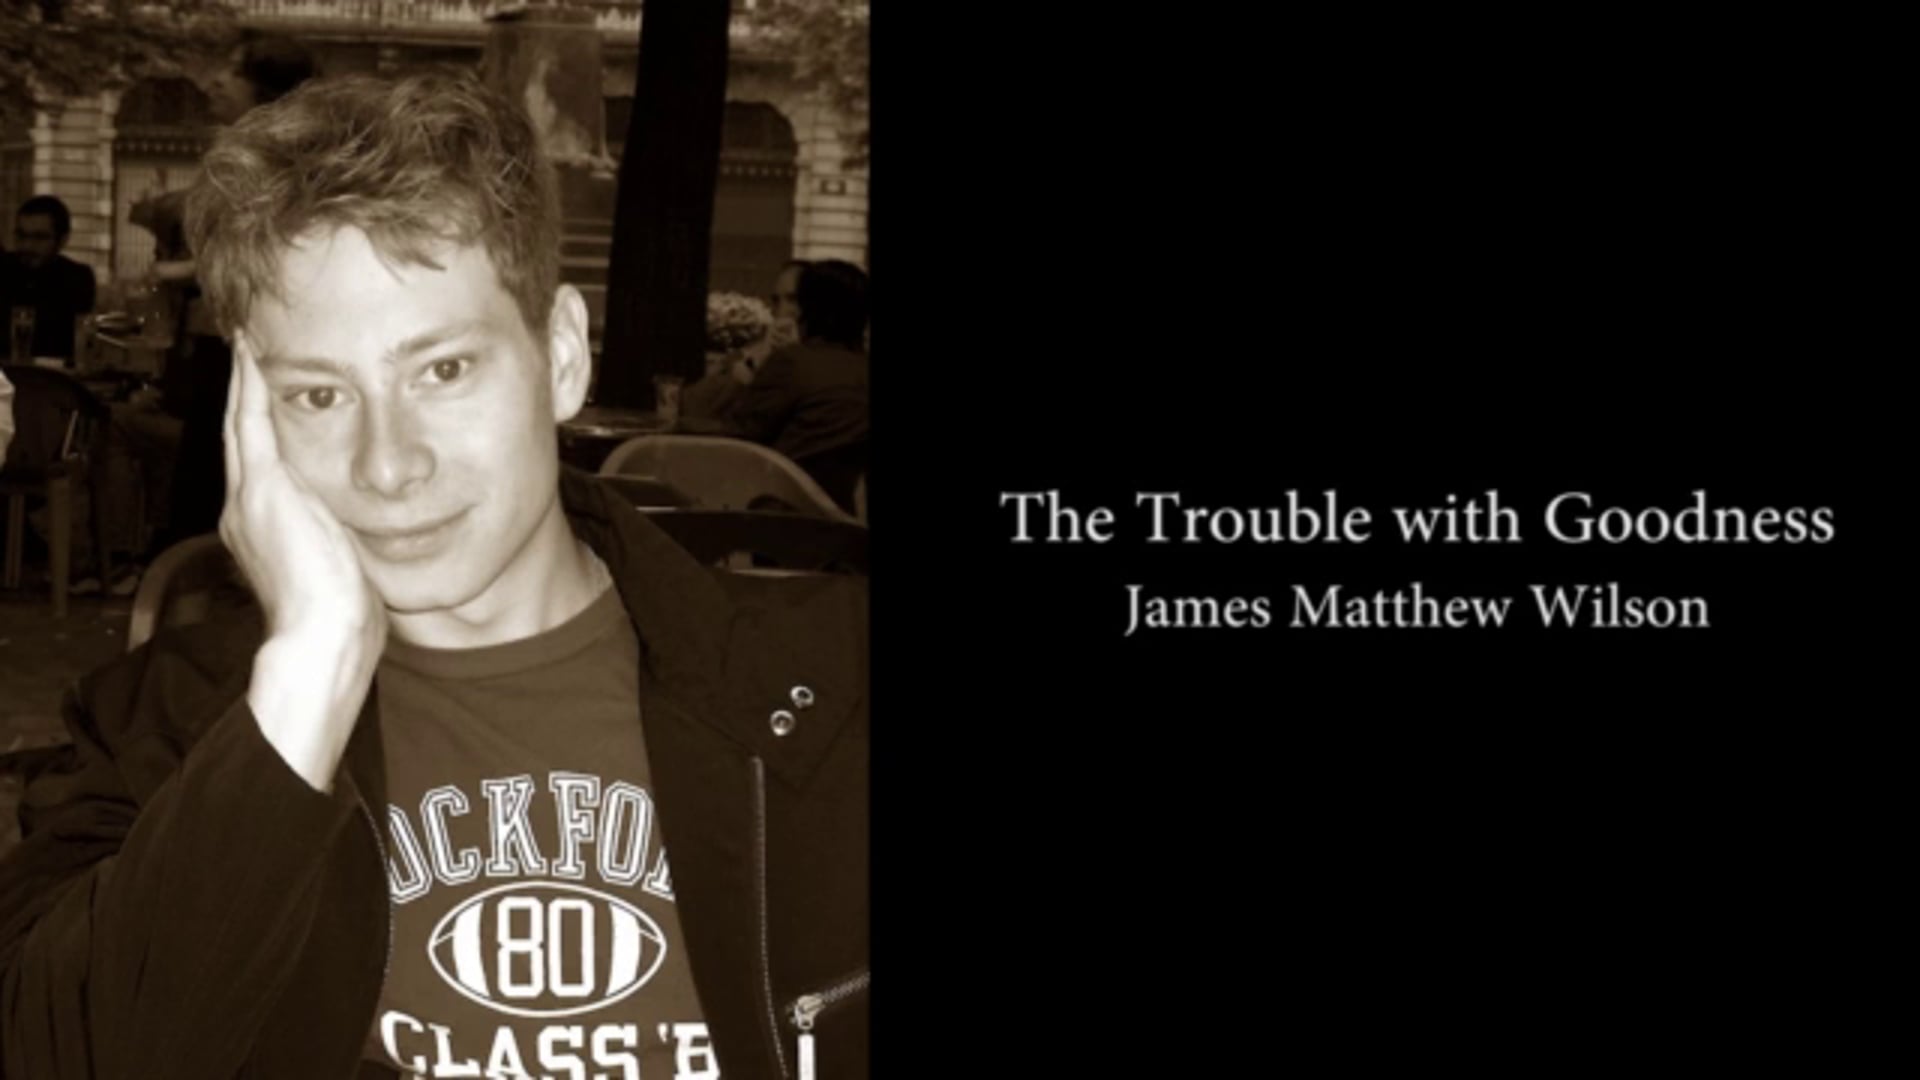 James Matthew Wilson: The Trouble with Goodness